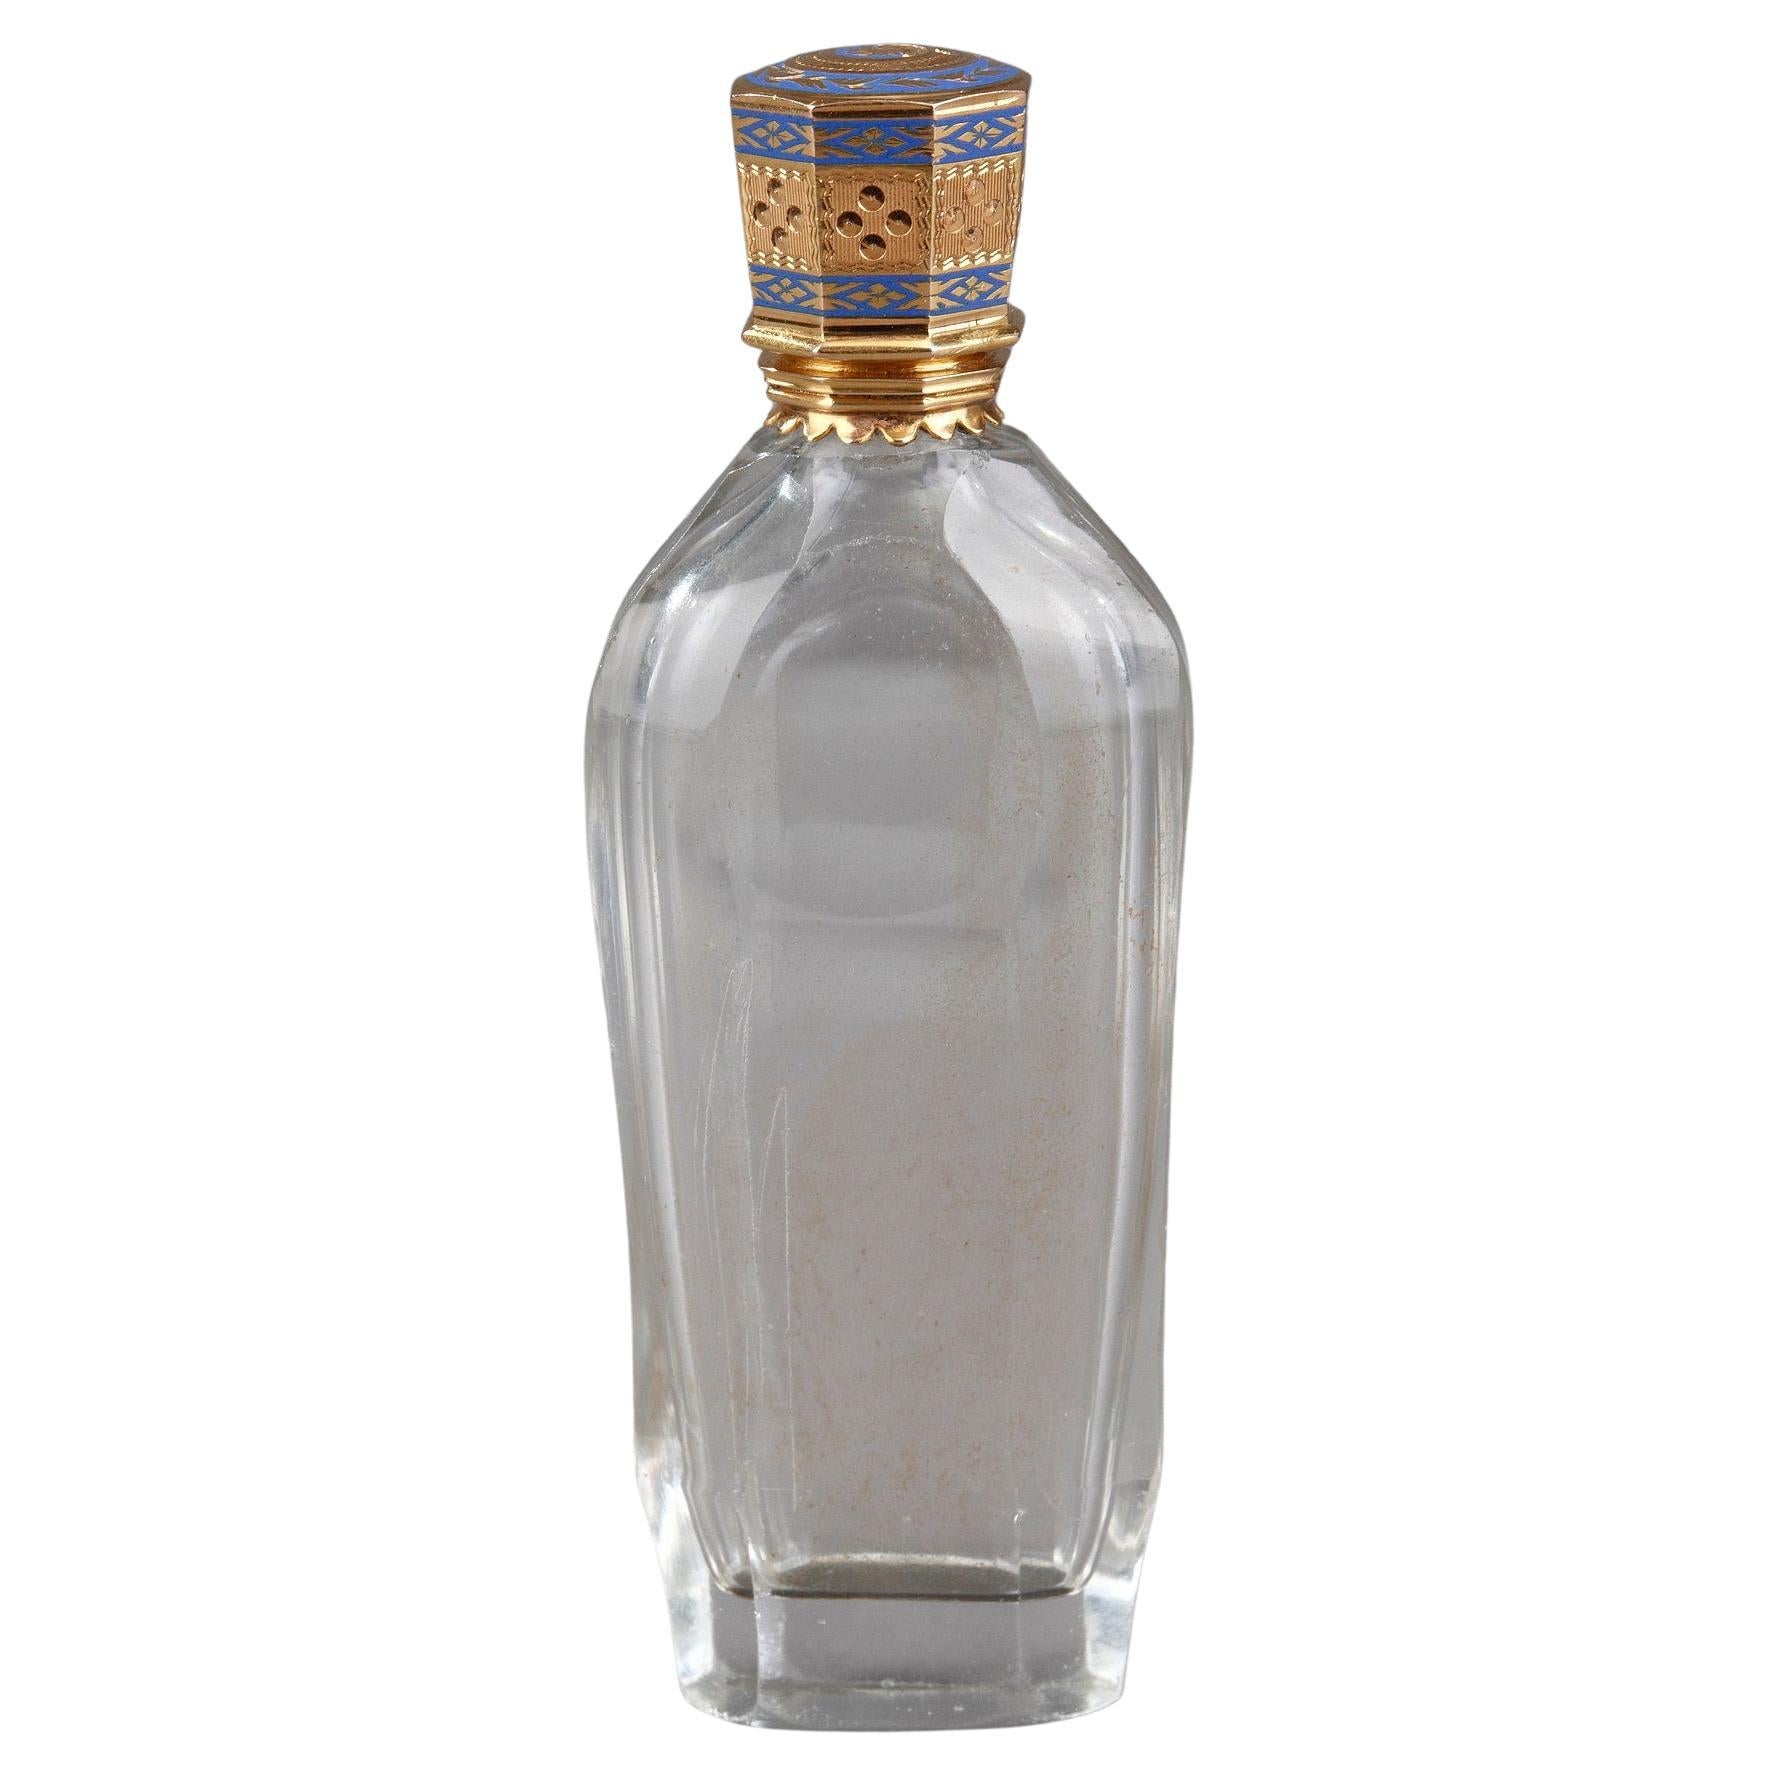 Empire Gold and Enamelled Scent Bottle